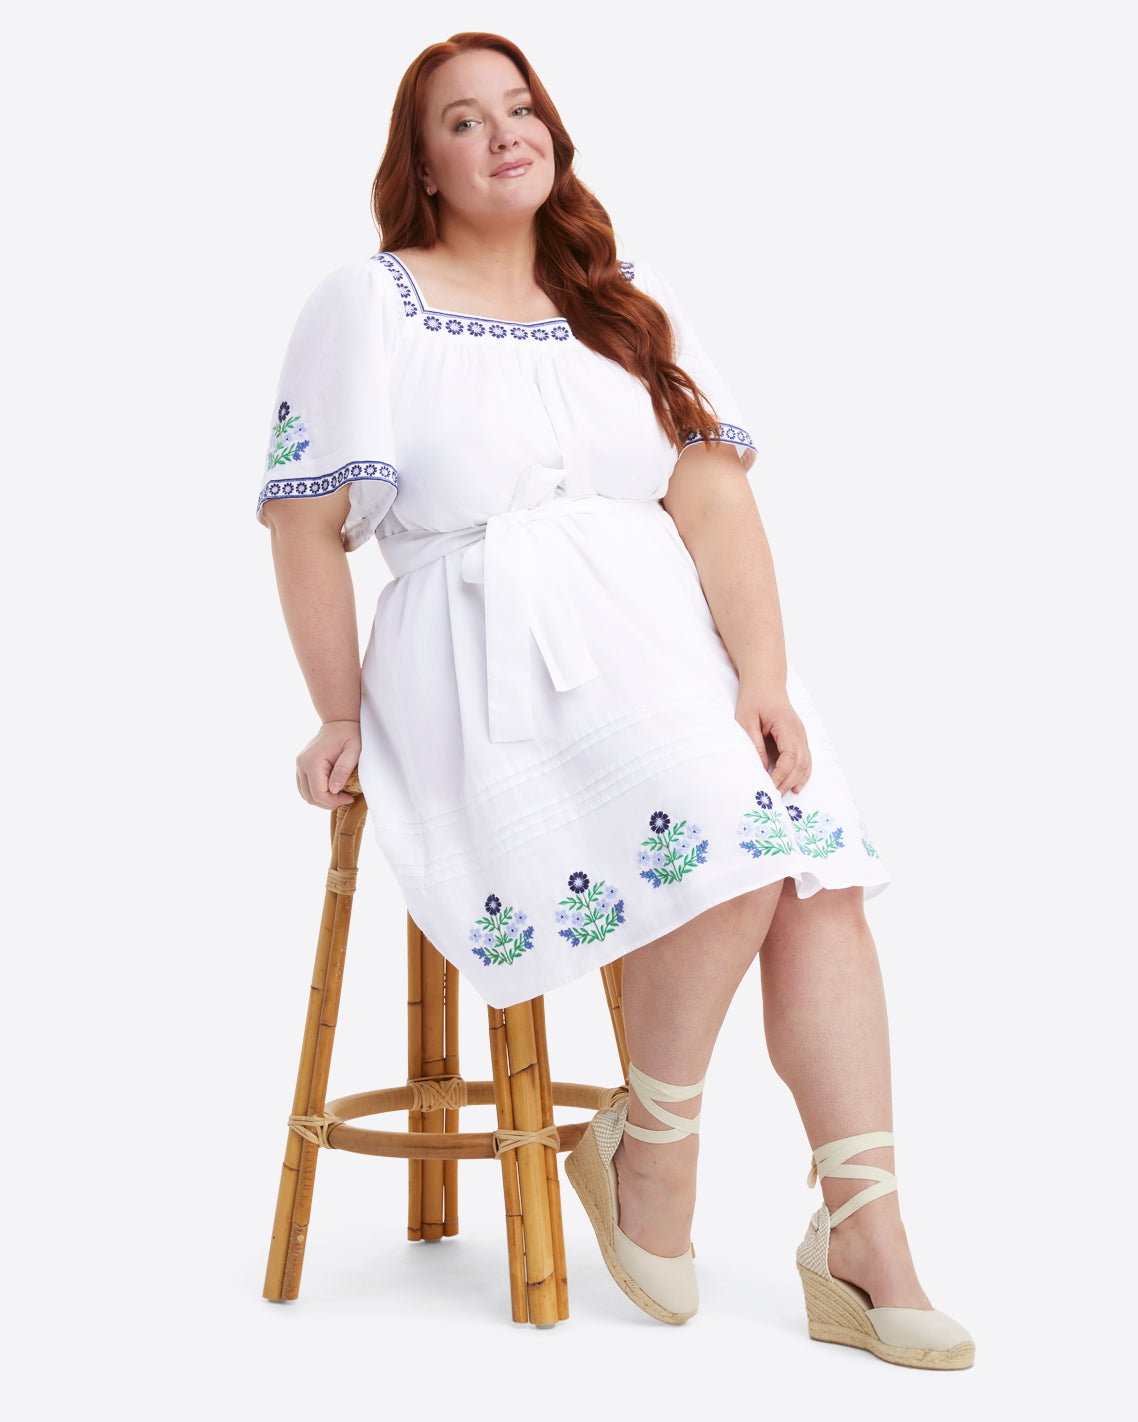 Maren Mini Dress in Floral Embroidery